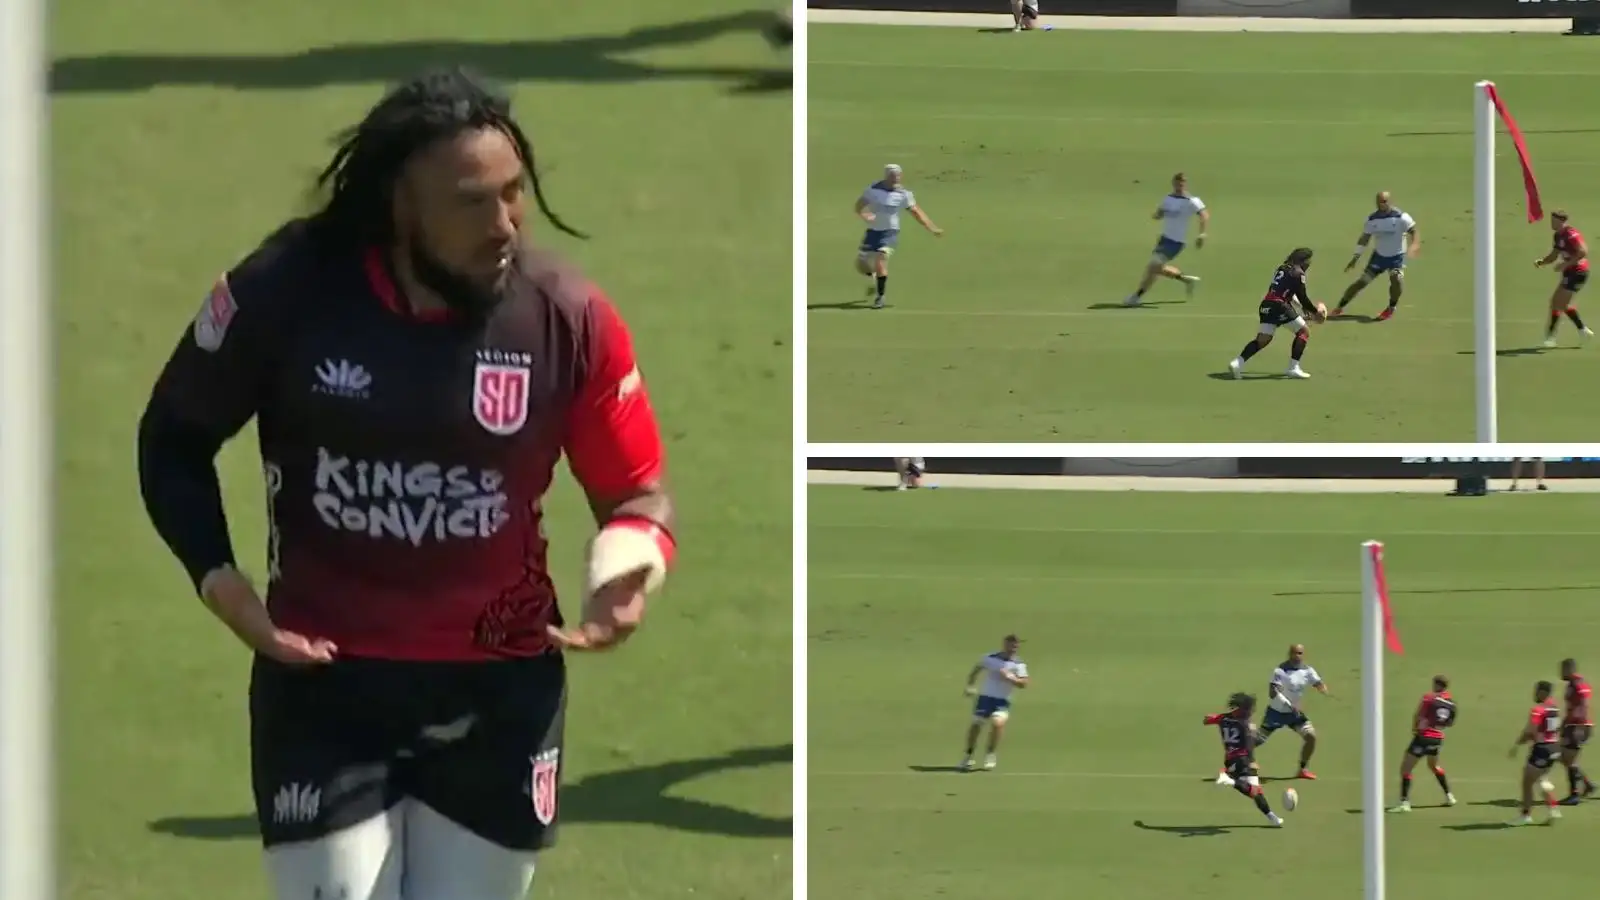 Former All Blacks centre Ma'a Nonu slotted a perfect drop goal in San Diego Legion's Major Rugby League (MLR) semi-final win over the Seattle Seawolves.